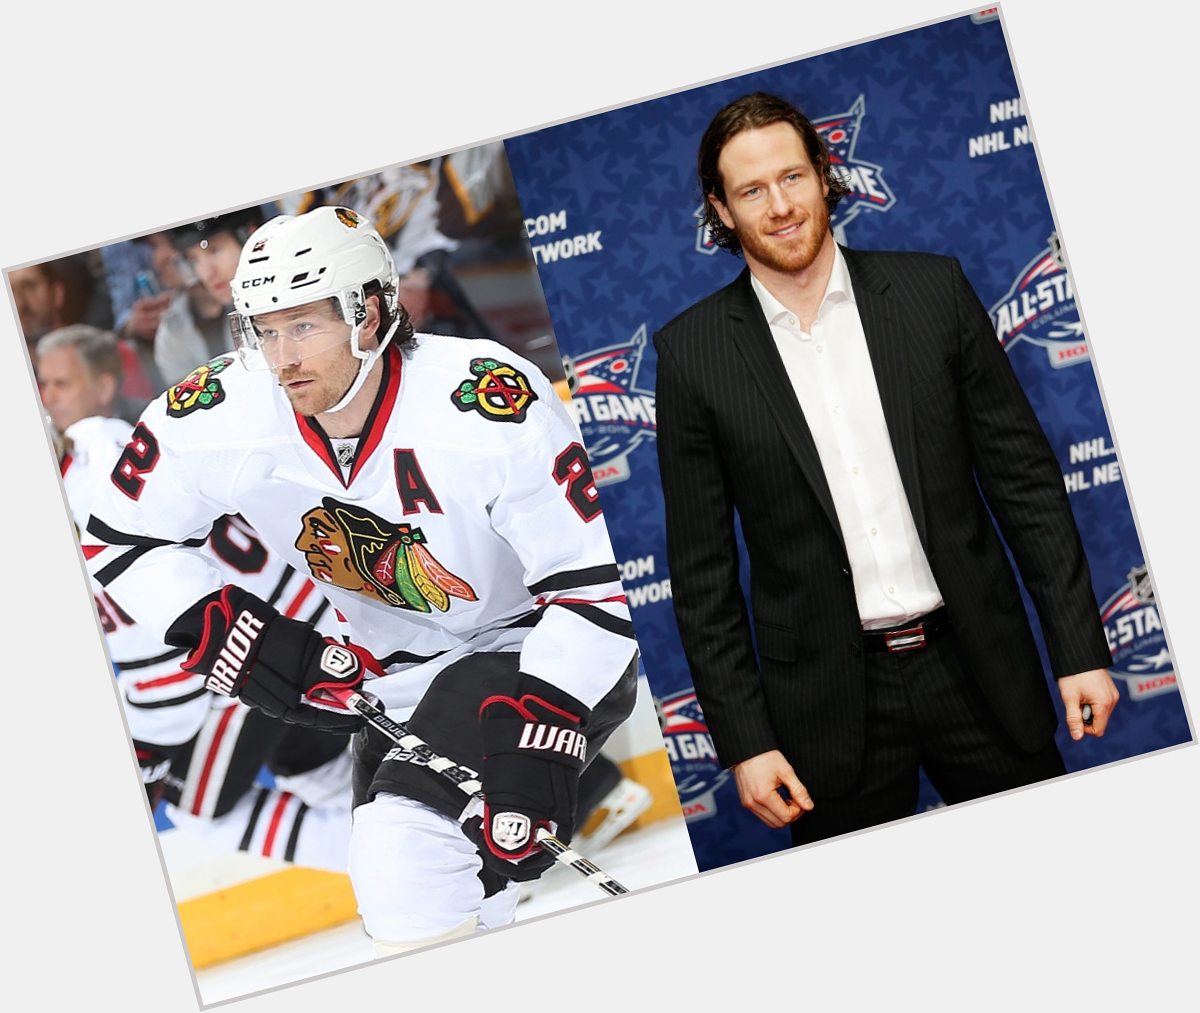 Http://fanpagepress.net/m/D/Duncan Keith Dating 2